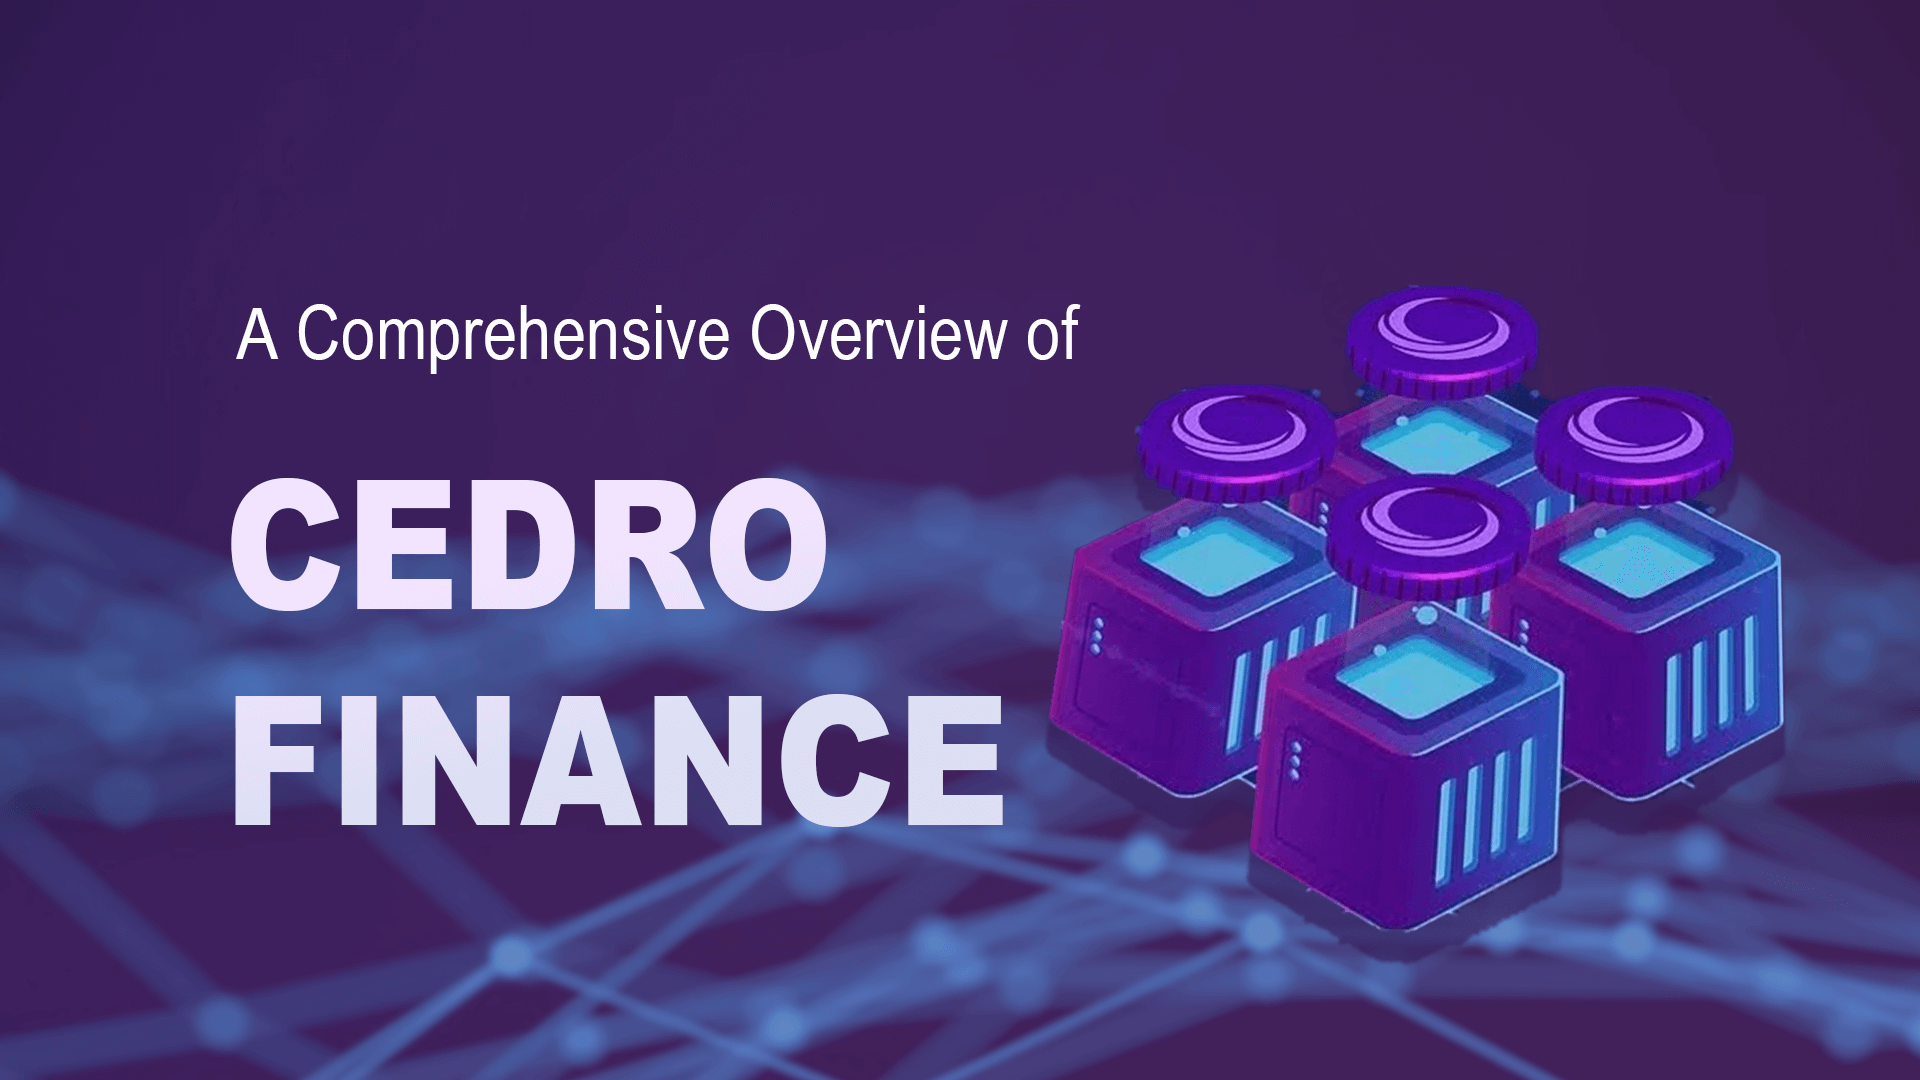 Ultimate overview of Cedro Finance